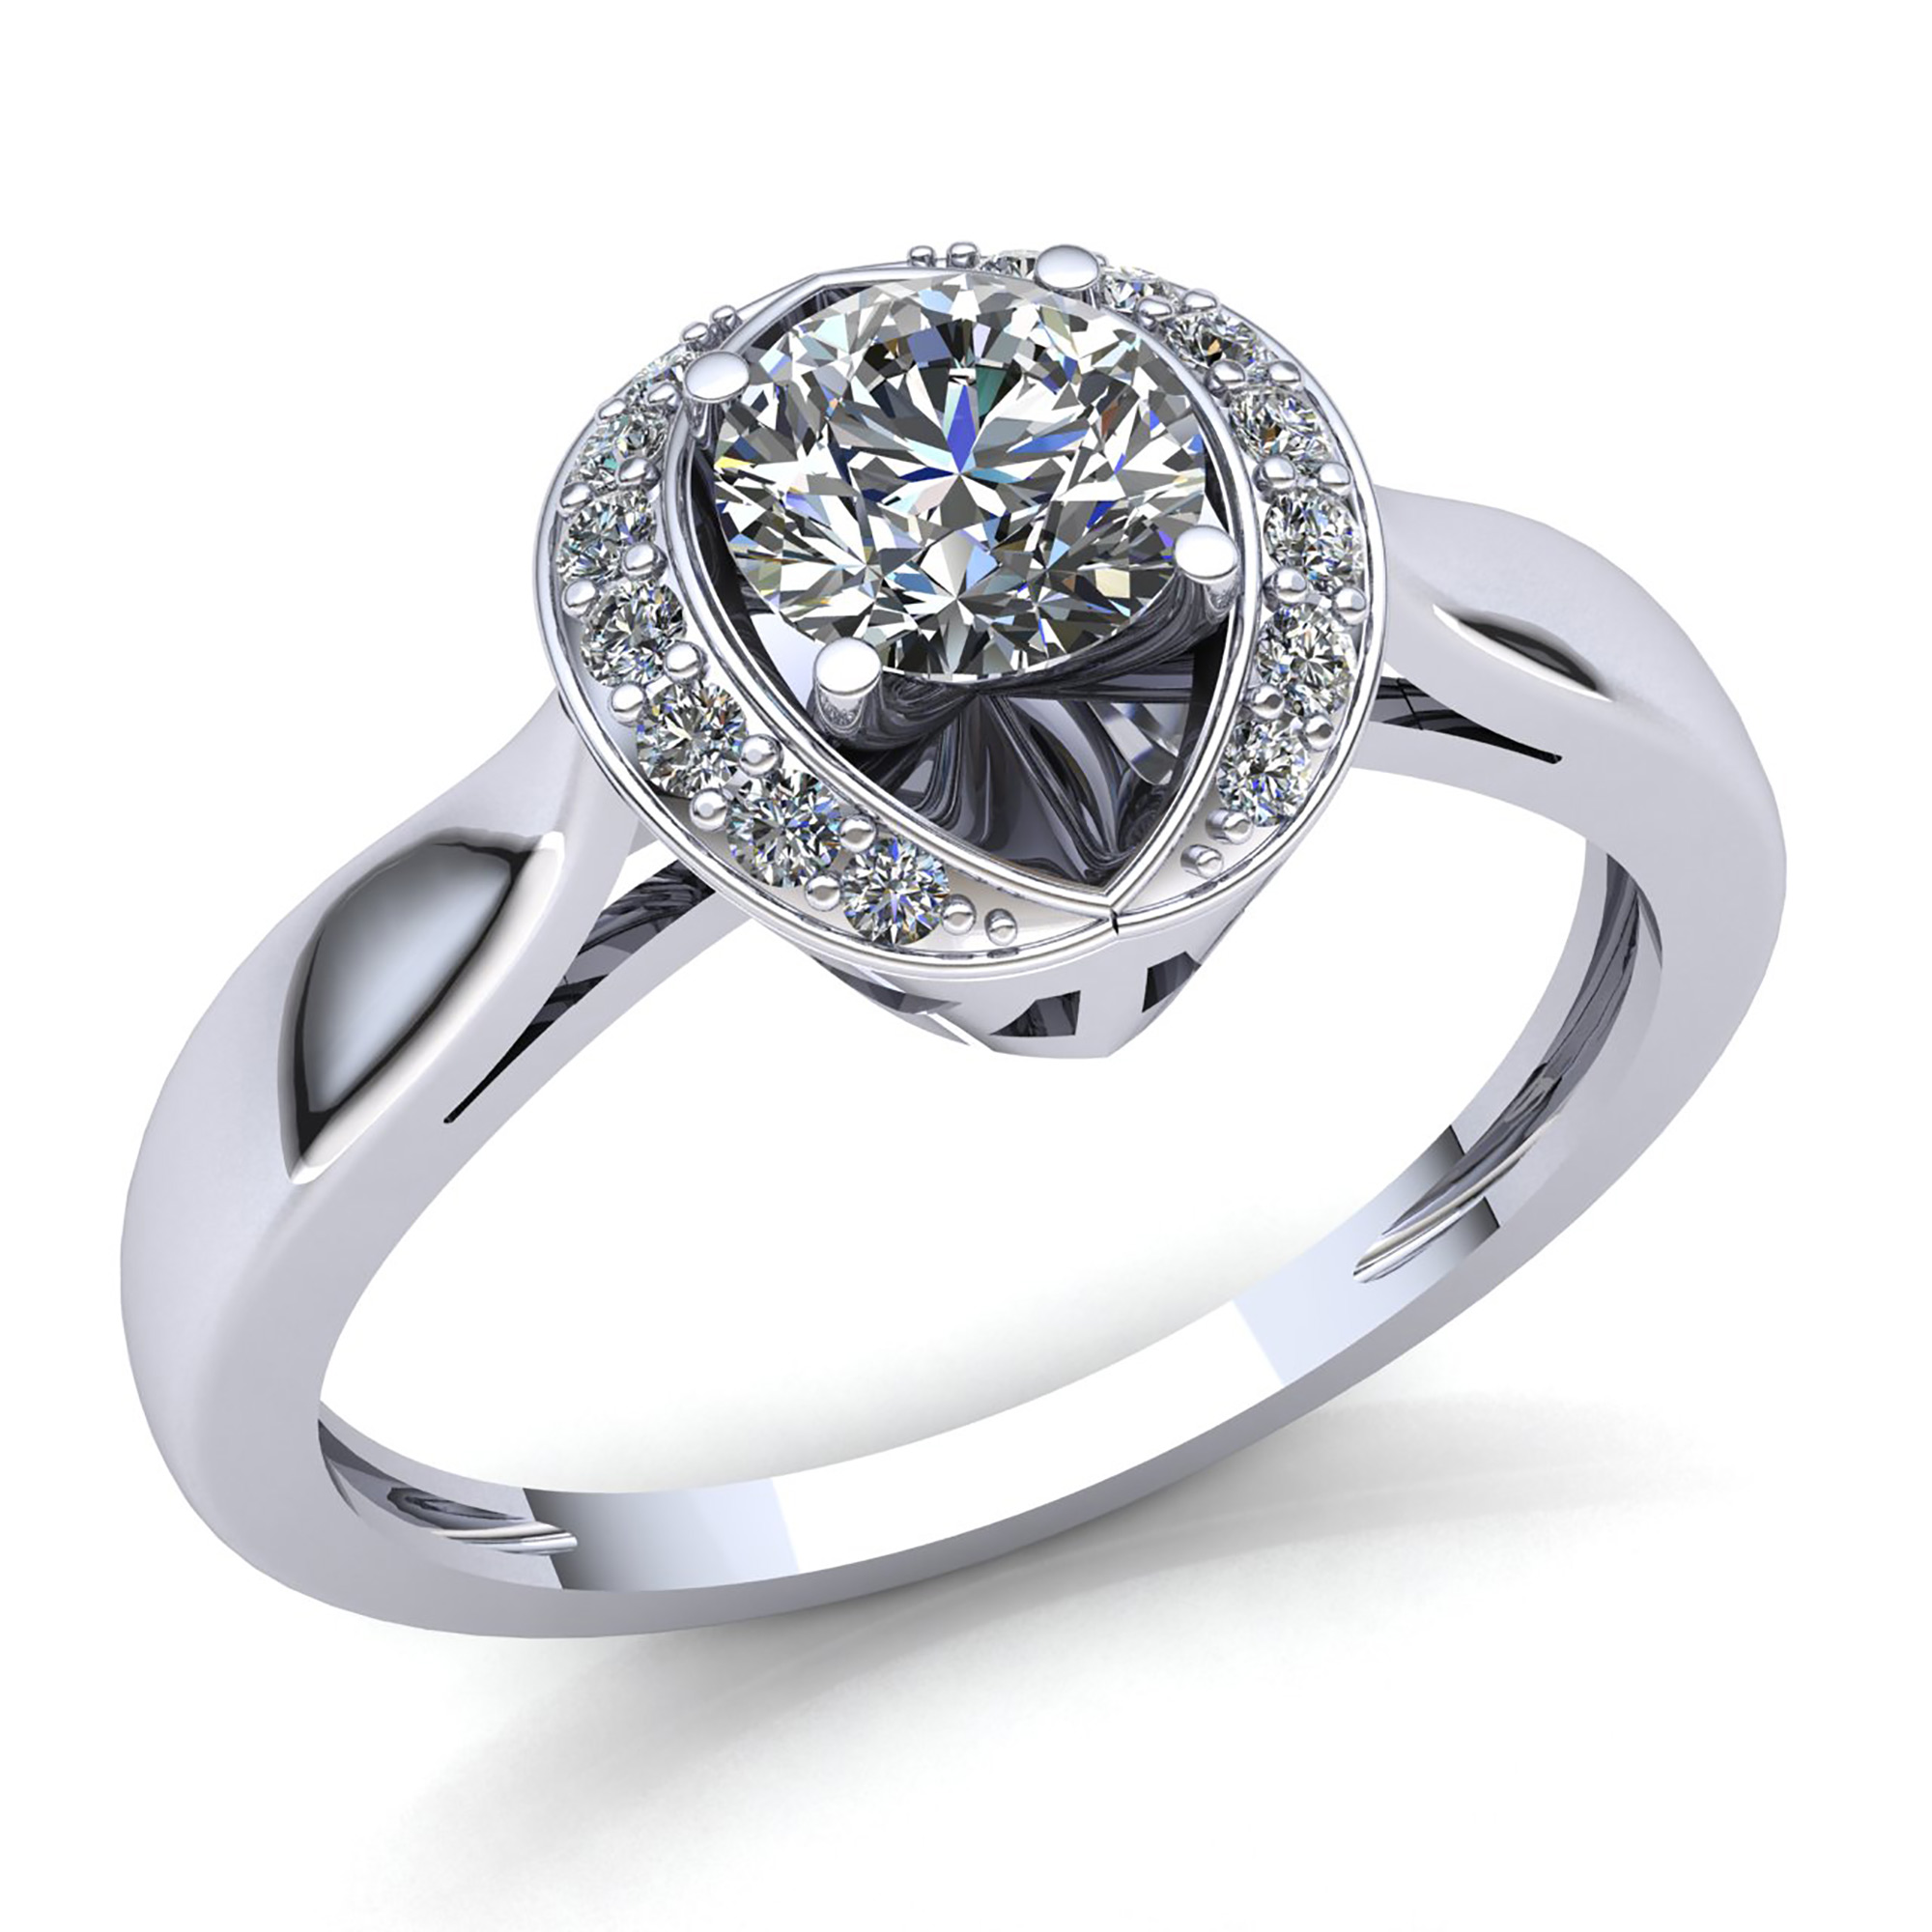 Pre-owned Jewelwesell 0.25carat Round Diamond Ladies Fancy Guard Solitaire Engagement Ring 10k Gold